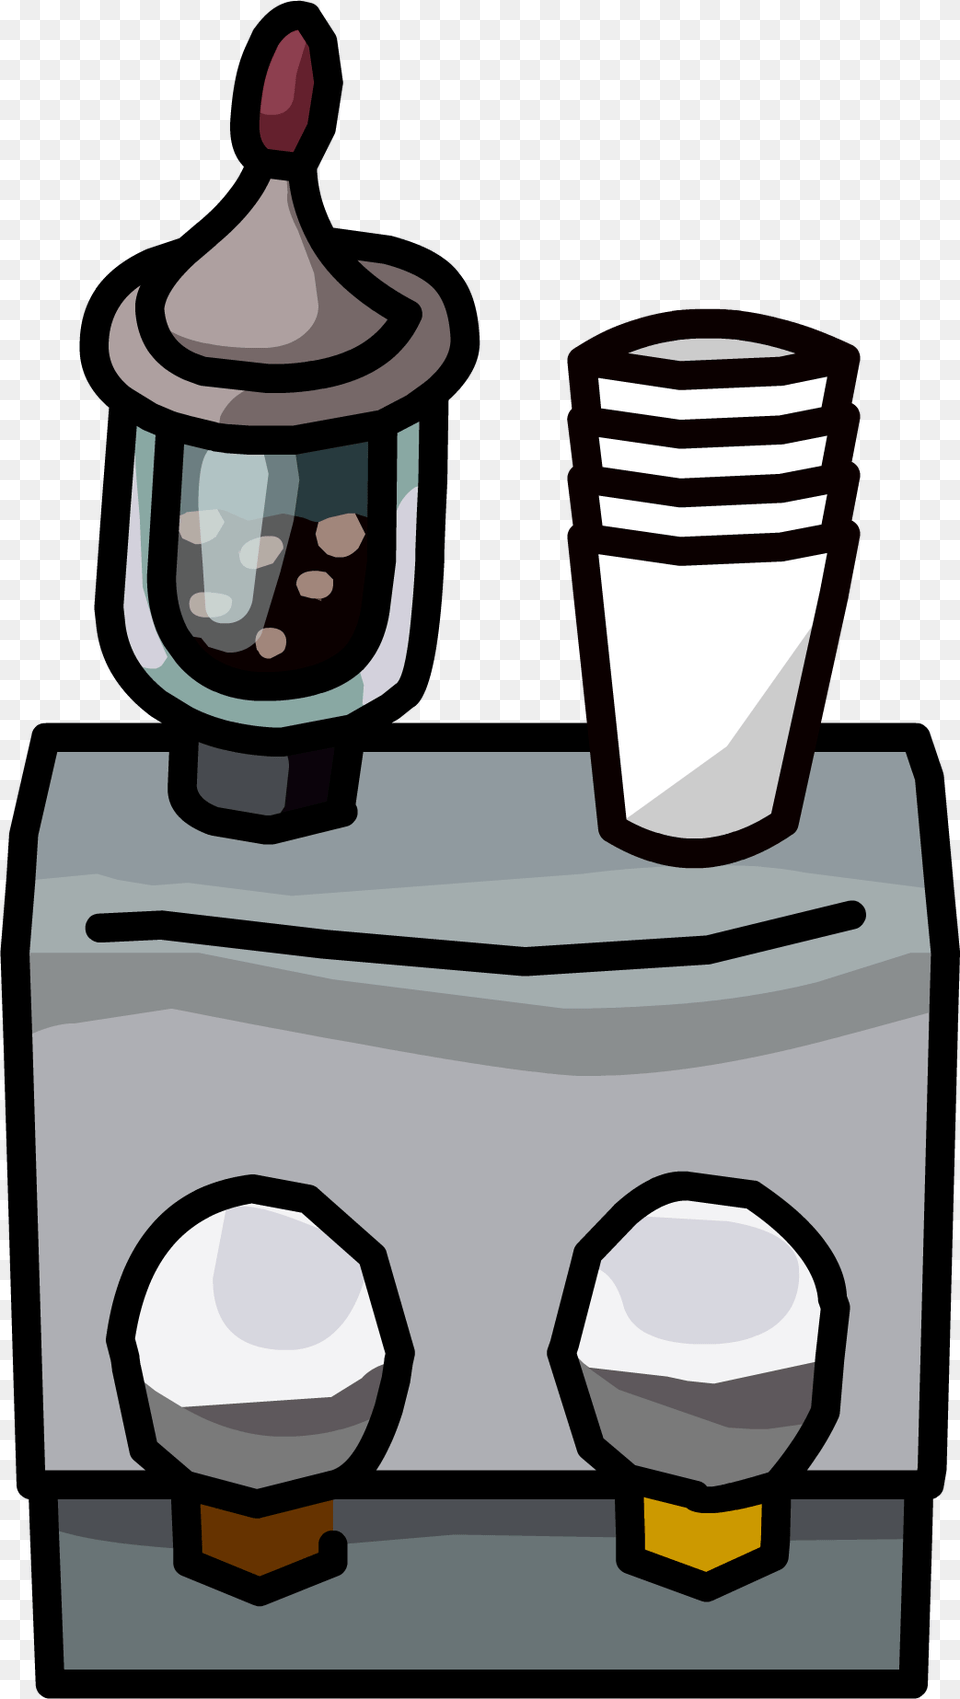 Club Penguin Rewritten Wiki Club Penguin Coffee Maker, Device, Appliance, Electrical Device, Mixer Png Image